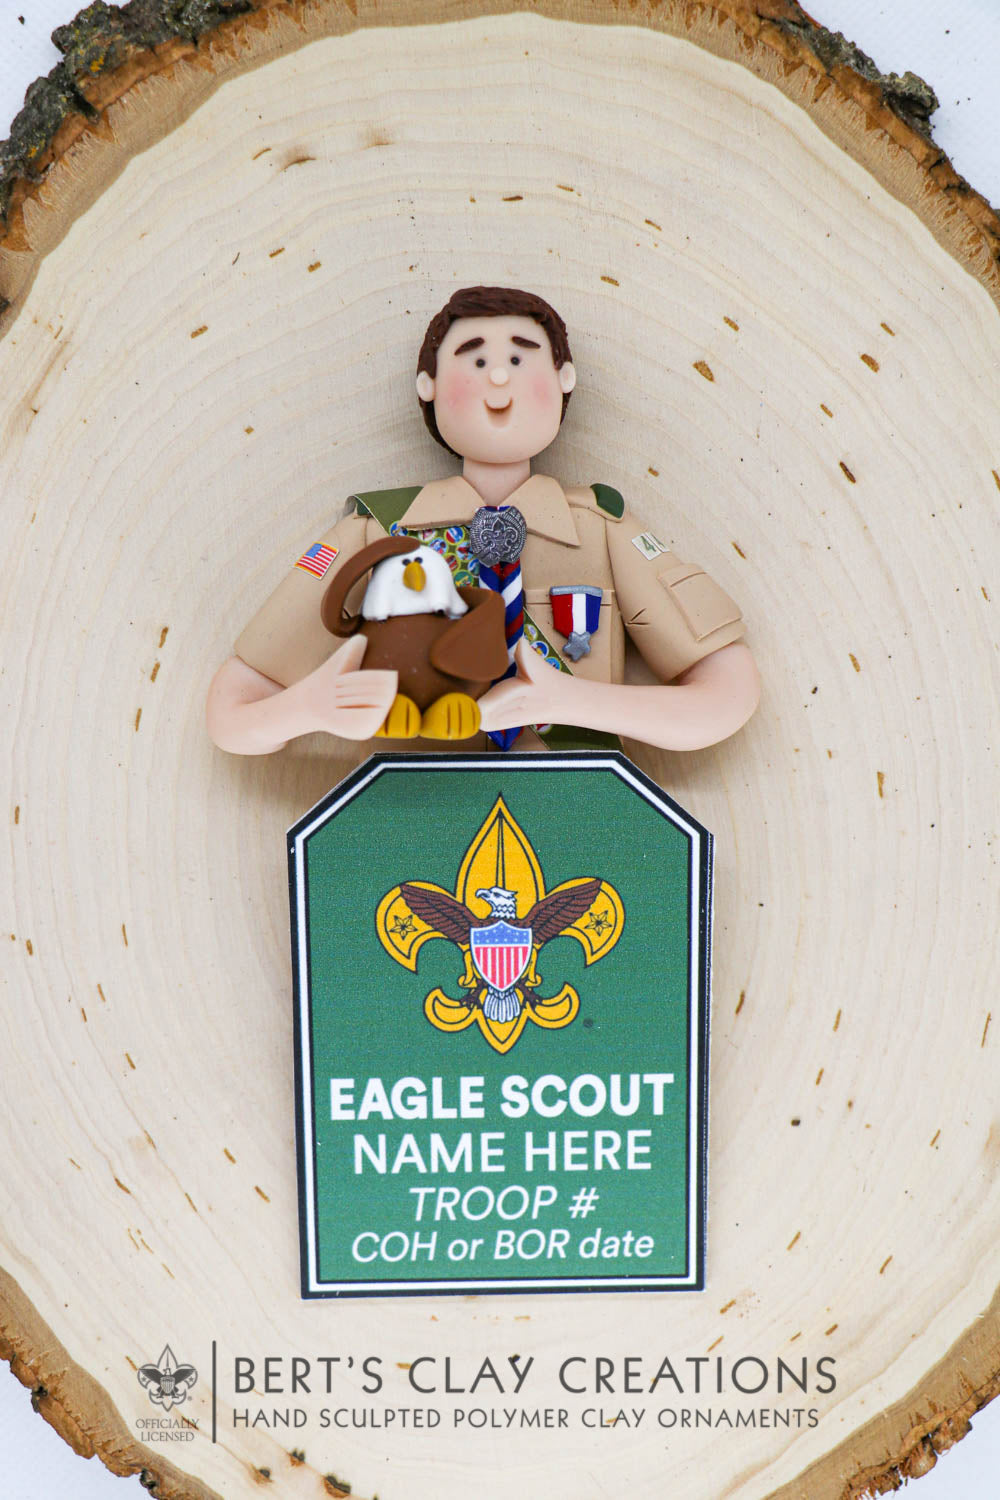 BSA - Eagle Scout Ornament (Bust Version) - Bert's Clay Creations